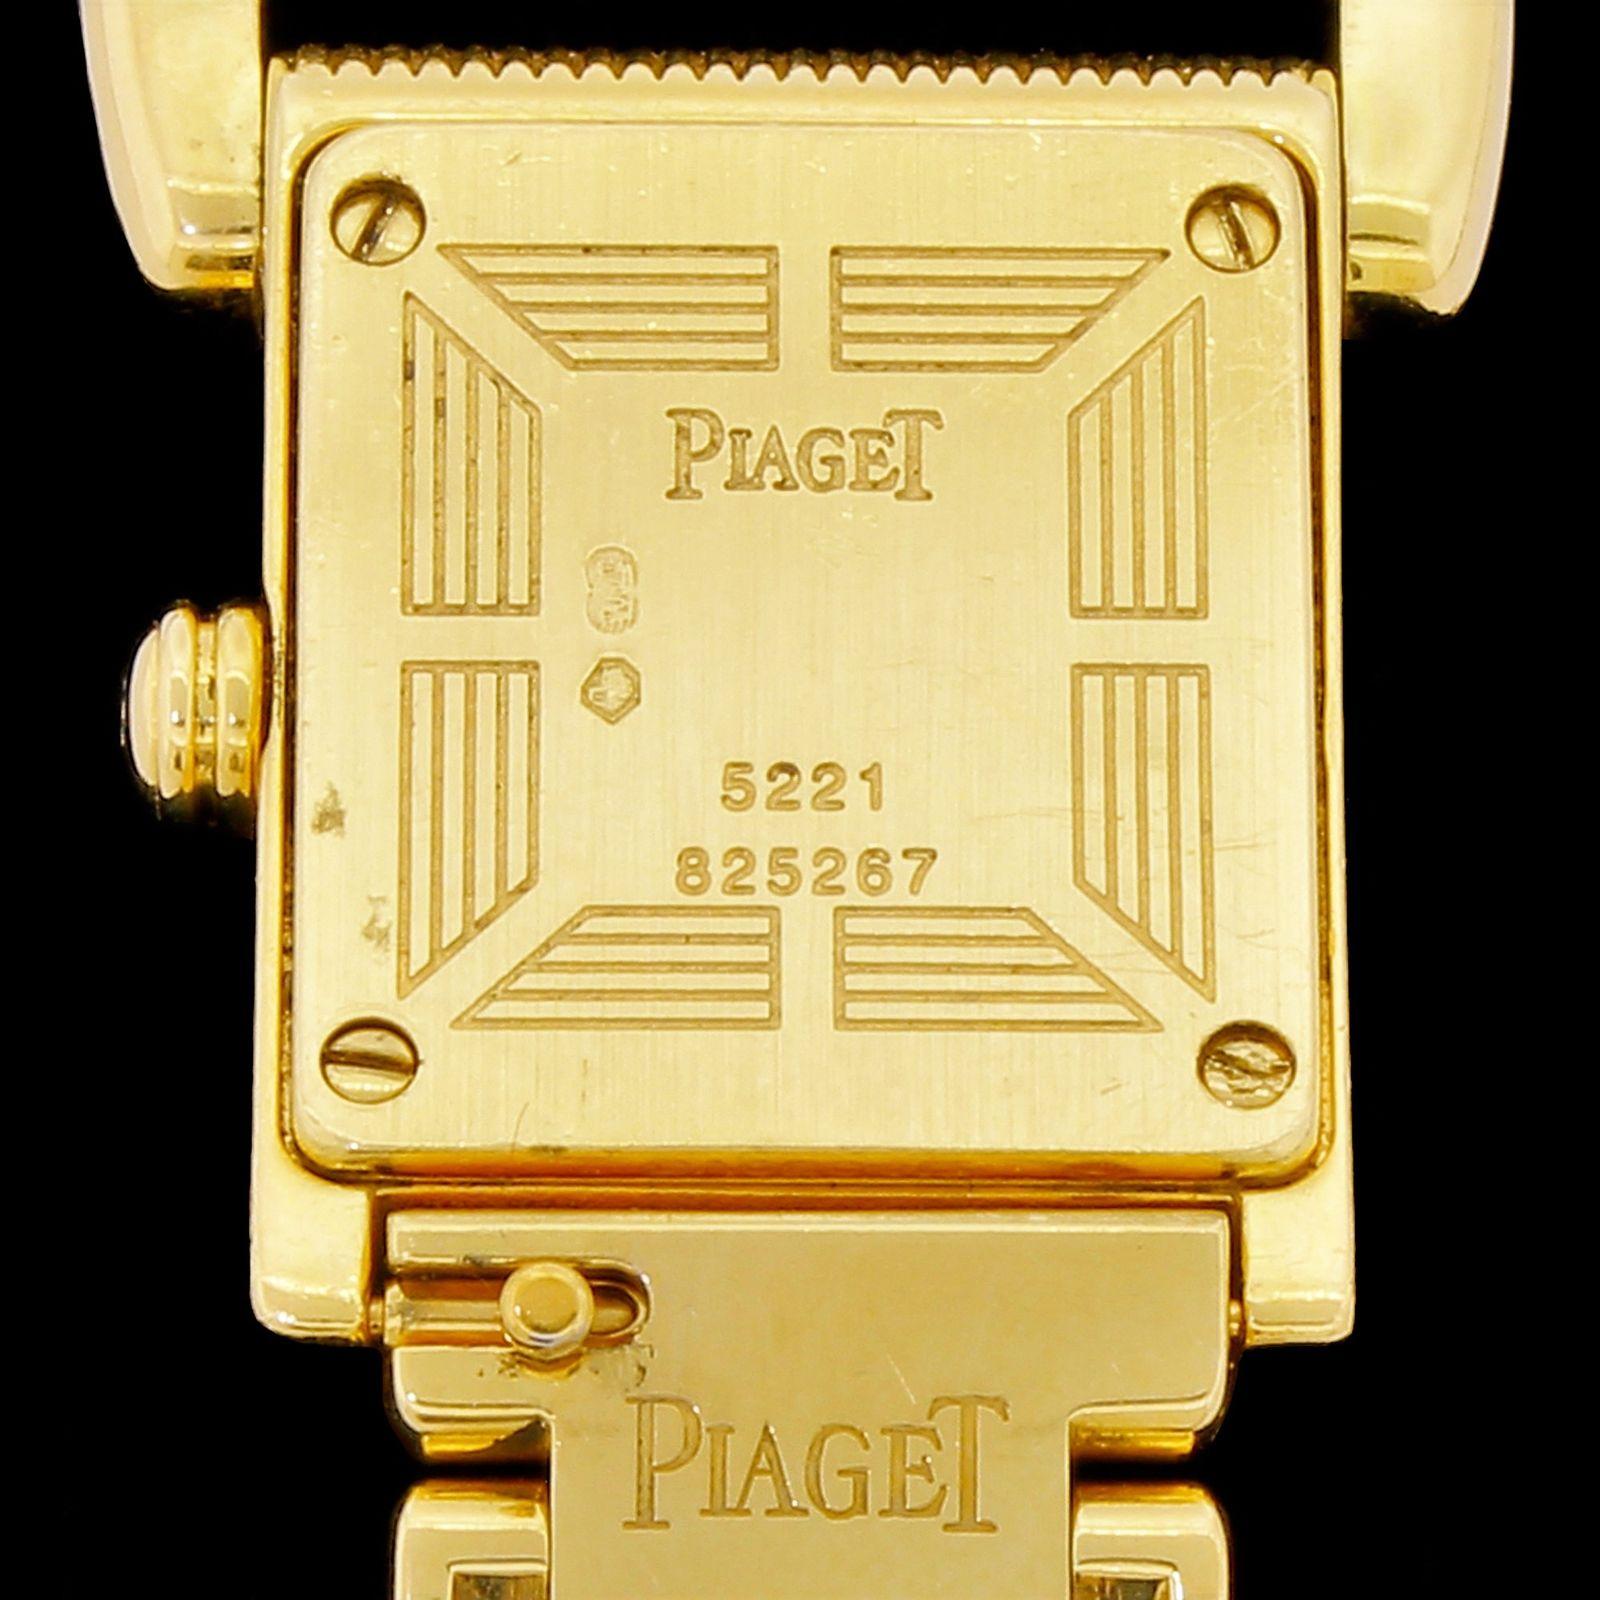 Modern  Piaget 18 Karat 750 Solid Gold Diamond Watch Tan Colored Dial Miss Protocole For Sale